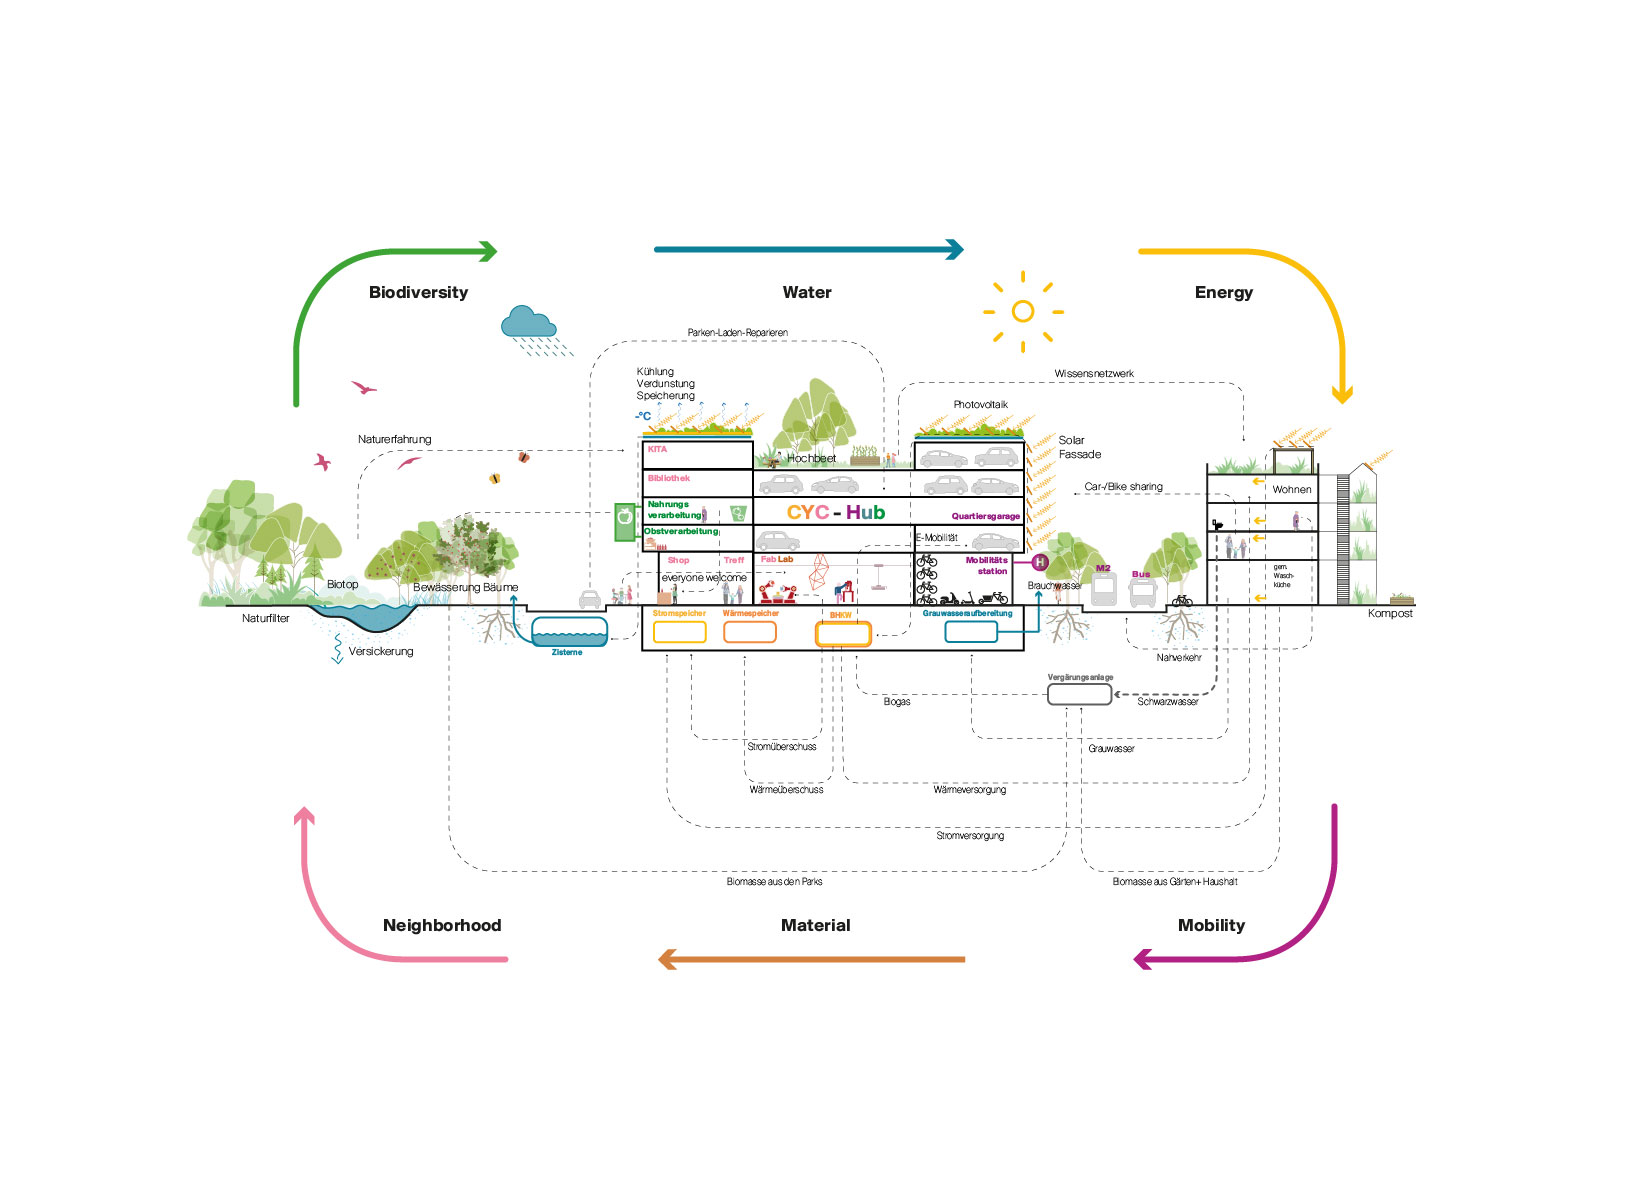 CYC- Hubs form the interface of the urban metabolism